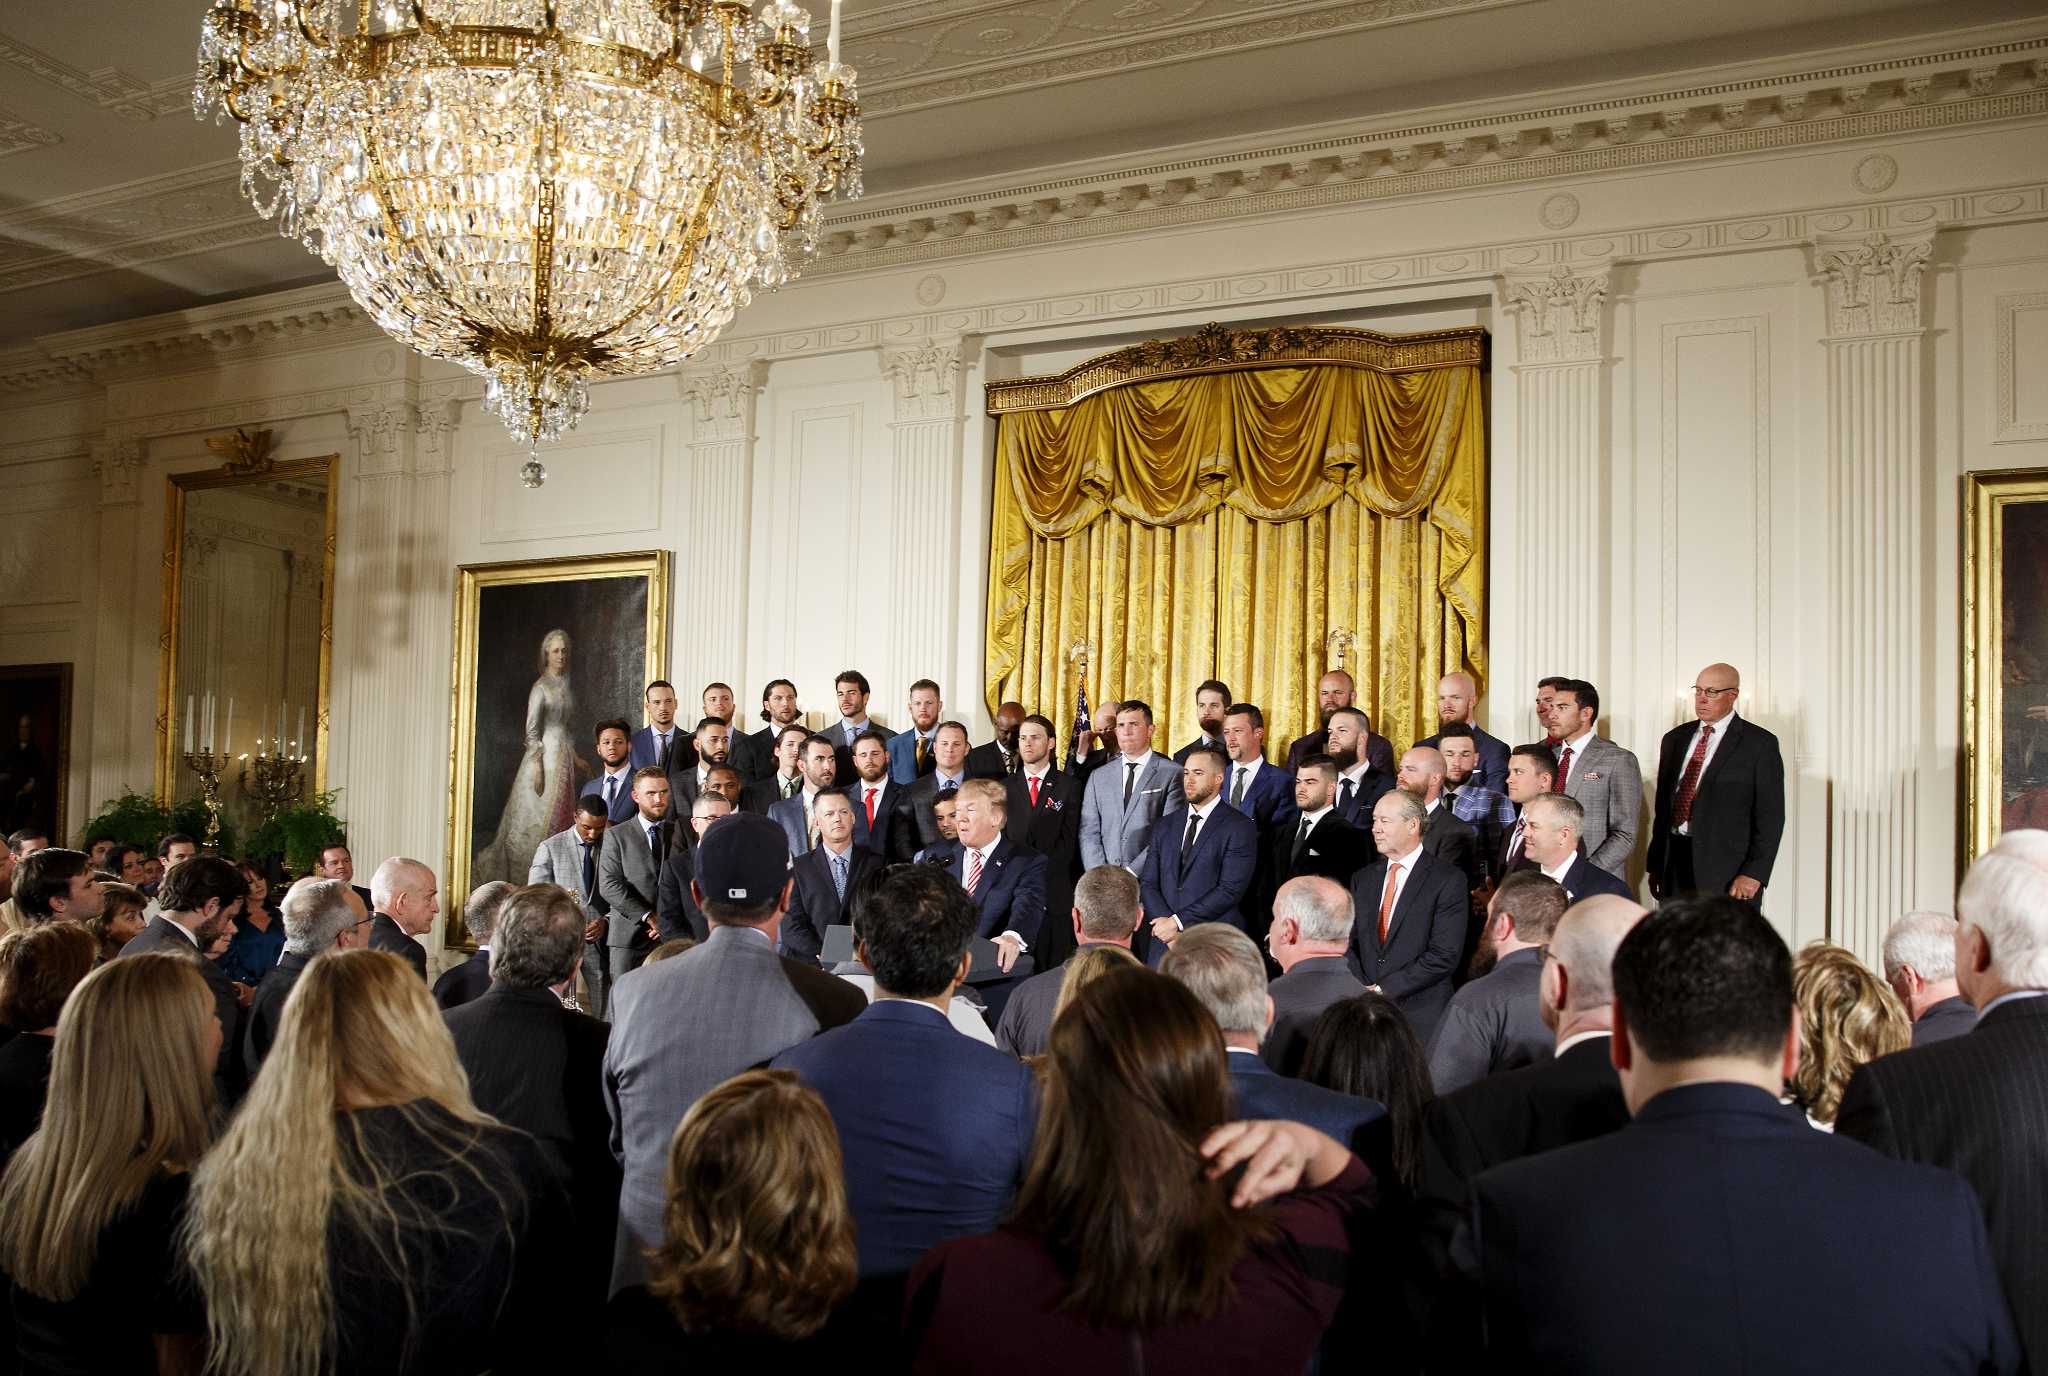 Astros' White House Drama — Jose Altuve's Death Stare, Carlos Correa's  Rightful Skip and Mattress Mack's Joy: Hanging with Donald Trump Brings  Unexpected Surprises